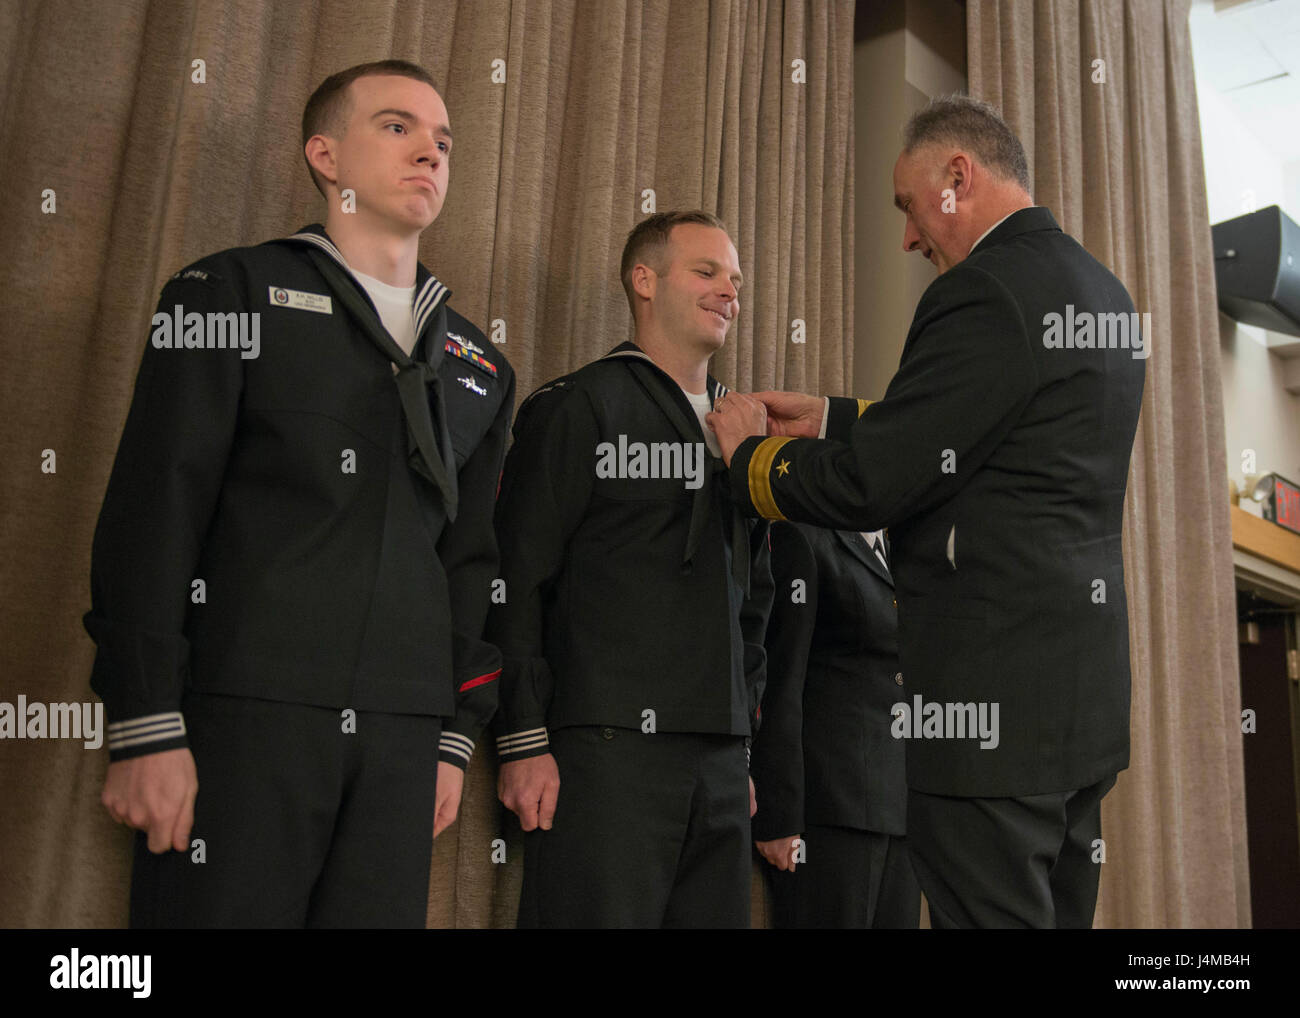 BANGOR, Wash. (Jan. 17, 2017) Rear Adm. John Tammen, commander, Submarine Group 9, congratulates Culinary Specialist 2nd Class Bradley White, from Cincinnati, Ohio, assigned to Submarine Group 9, on becoming the 2016 Shore Junior Sailor of the Year. The Shore Sailor of the Year Program was introduced in 1973, by former Chief of Naval Operations Adm. Elmo Zumwalt, to recognize superior performance at every command. (U.S. Navy photo by Mass Communication Specialist 1st Class Amanda R. Gray/Released) Stock Photo